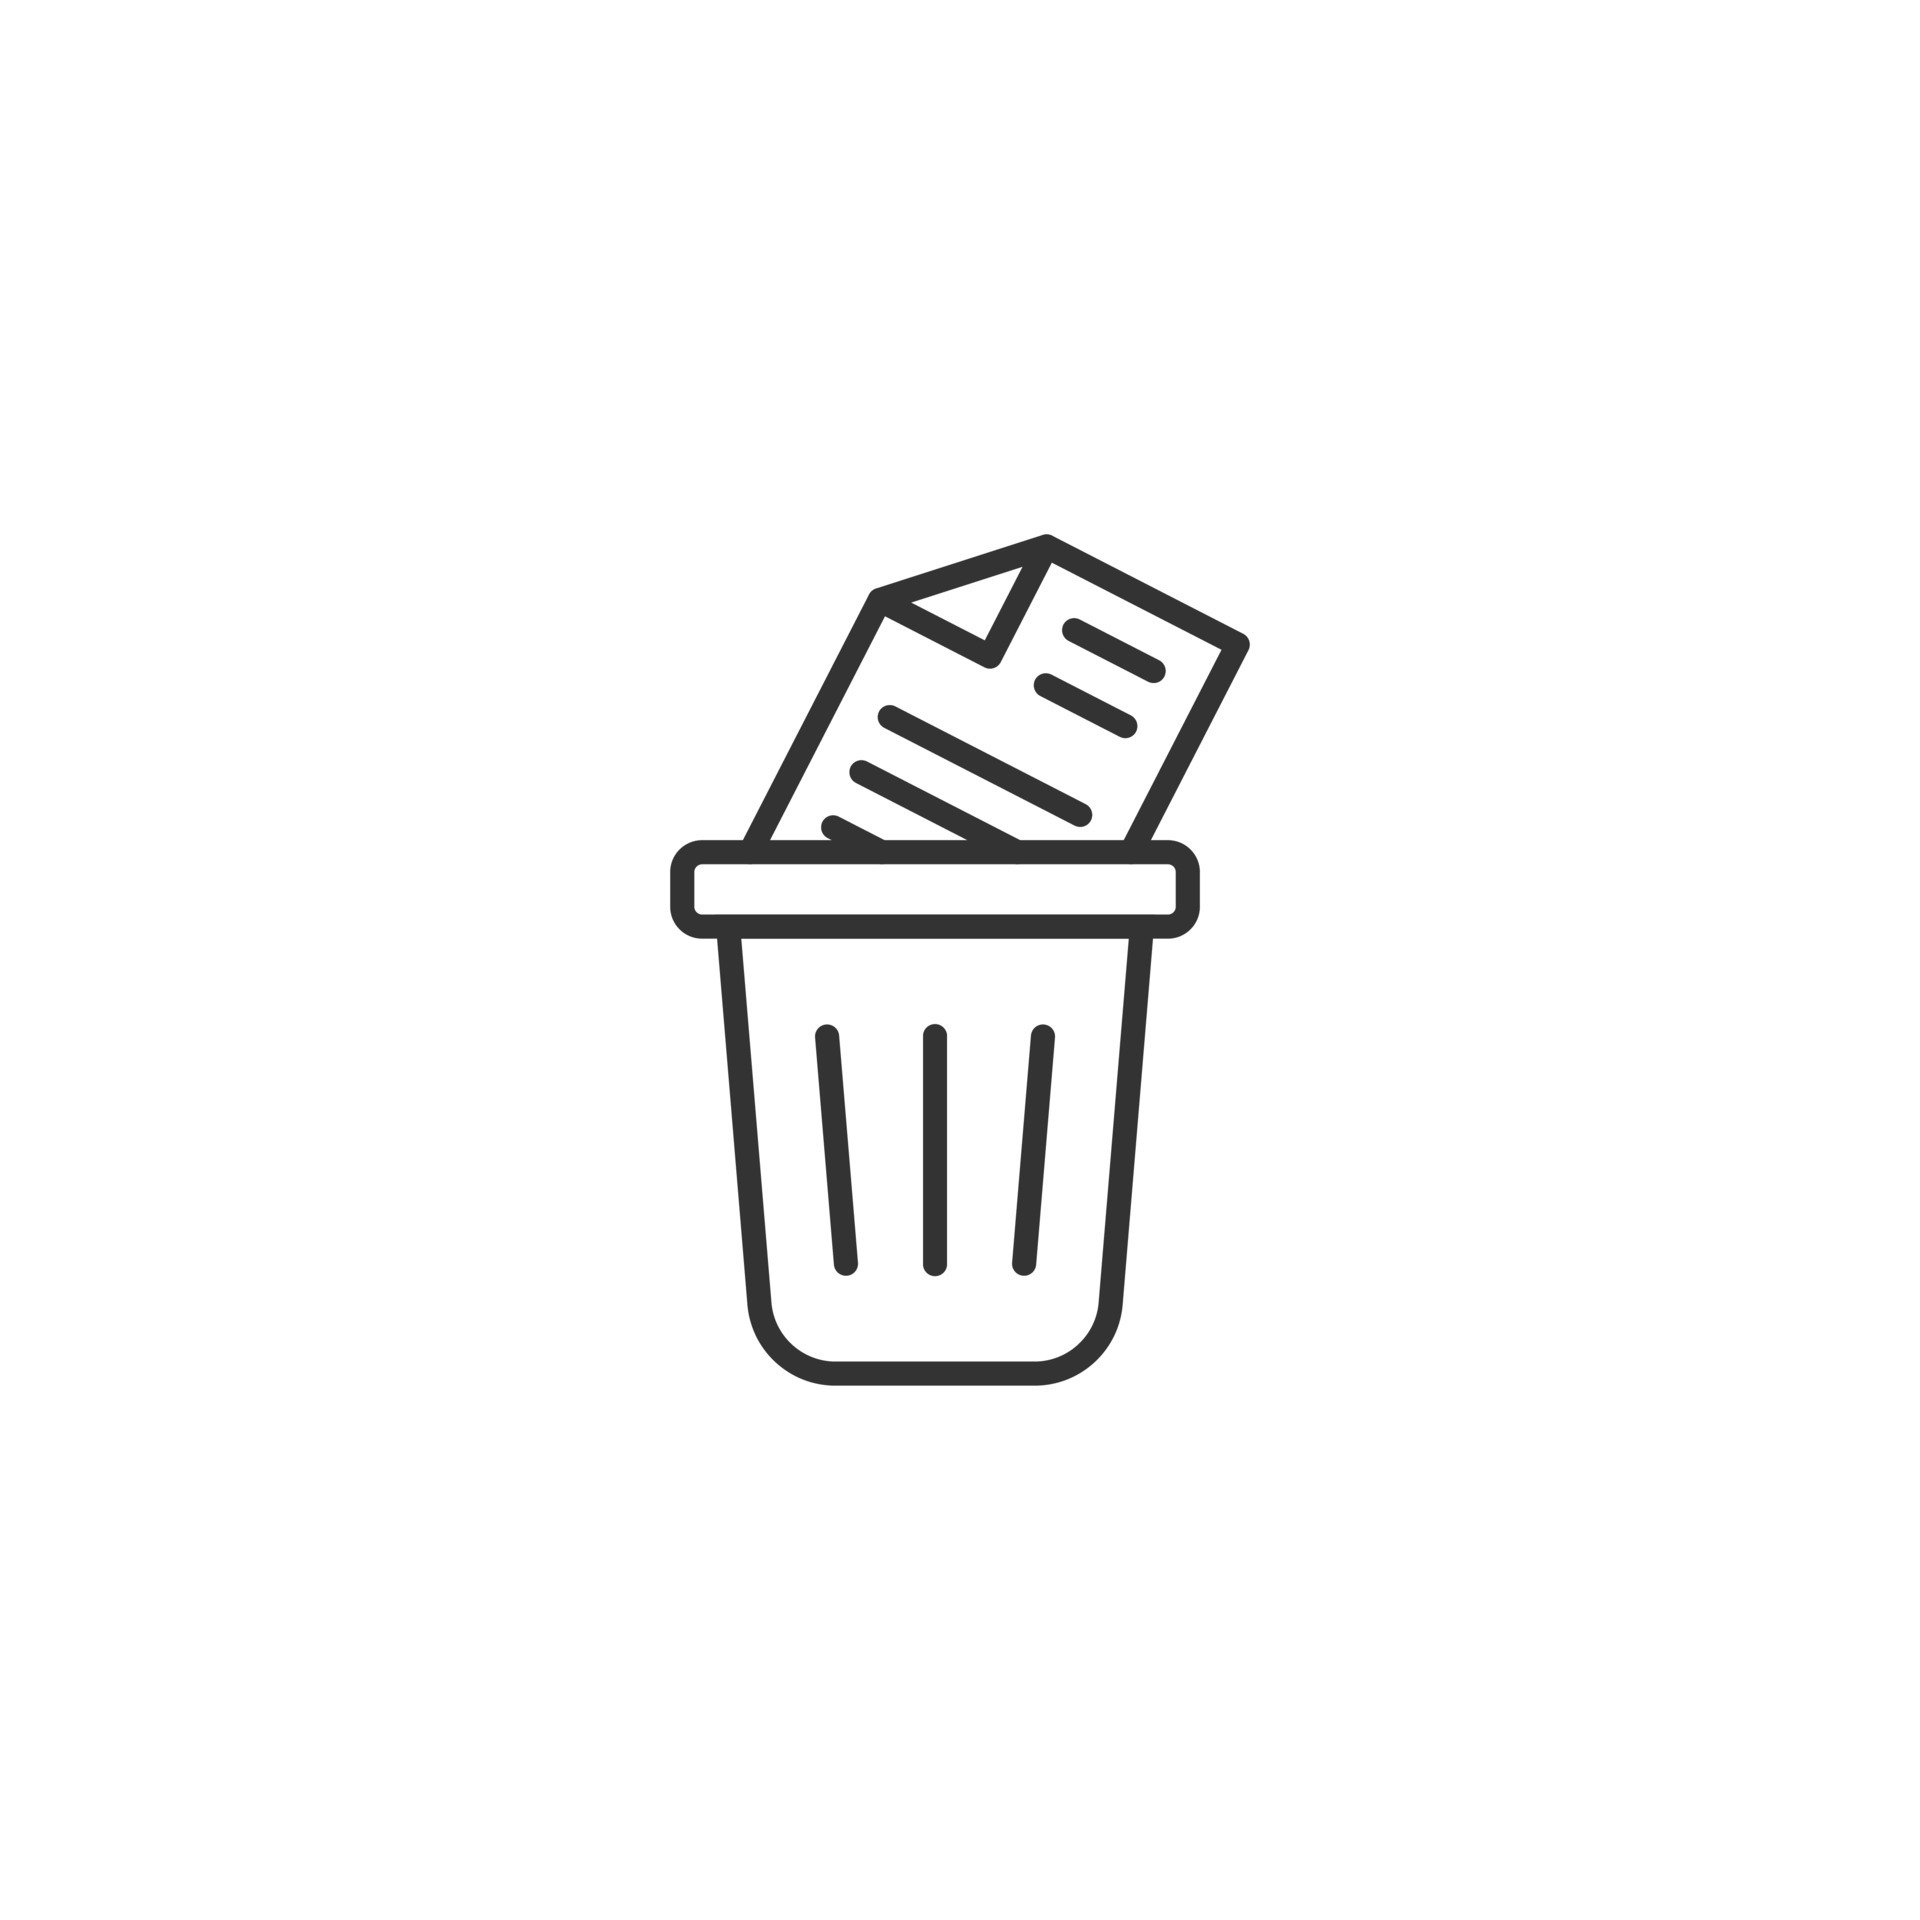 https://static.vecteezy.com/system/resources/previews/016/150/726/original/trash-bin-with-document-icon-in-flat-style-paper-recycle-illustration-on-white-isolated-background-office-garbage-business-concept-vector.jpg